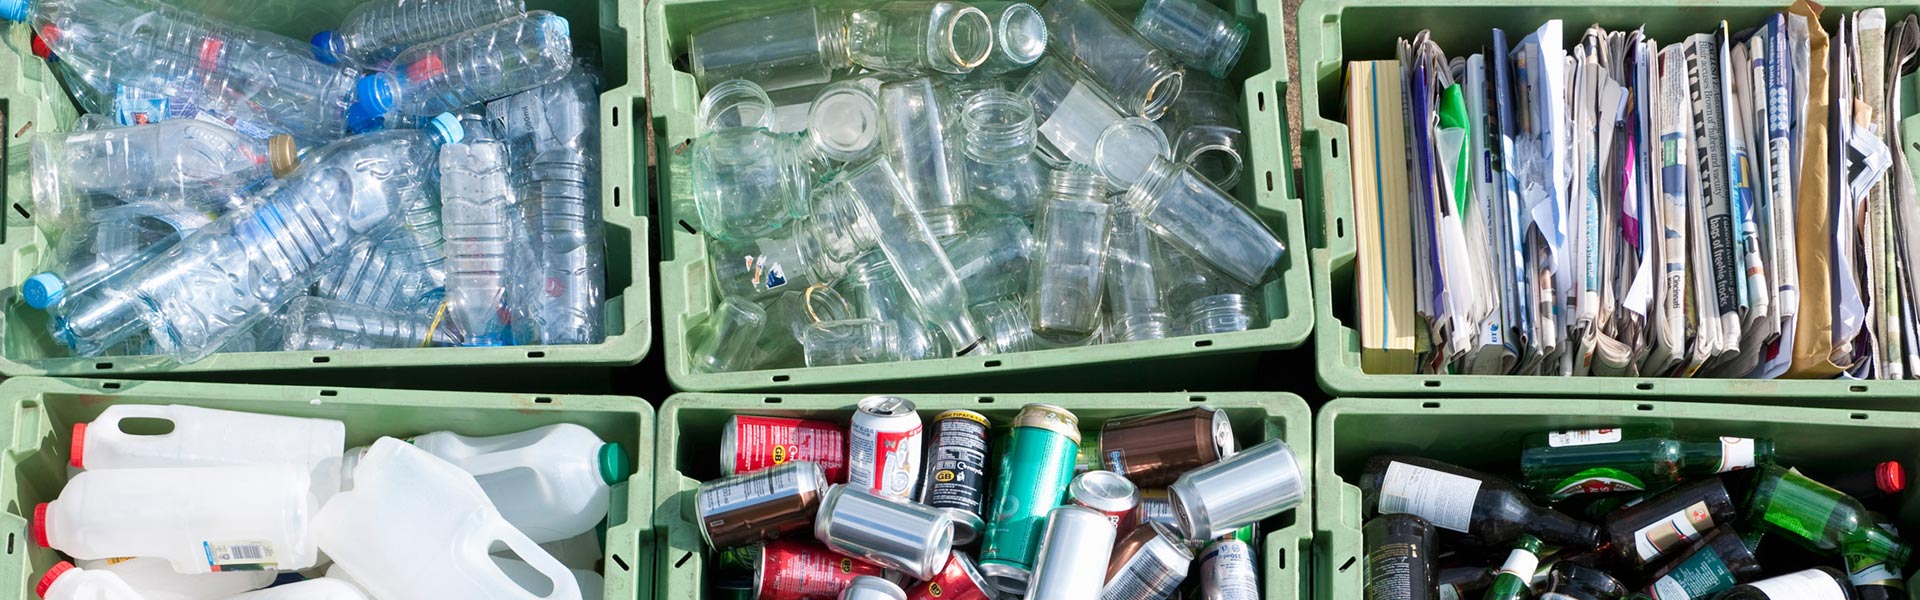 SAP Announces a New Global Marketplace for Suppliers of Recycled Plastics and Plastic Alternatives